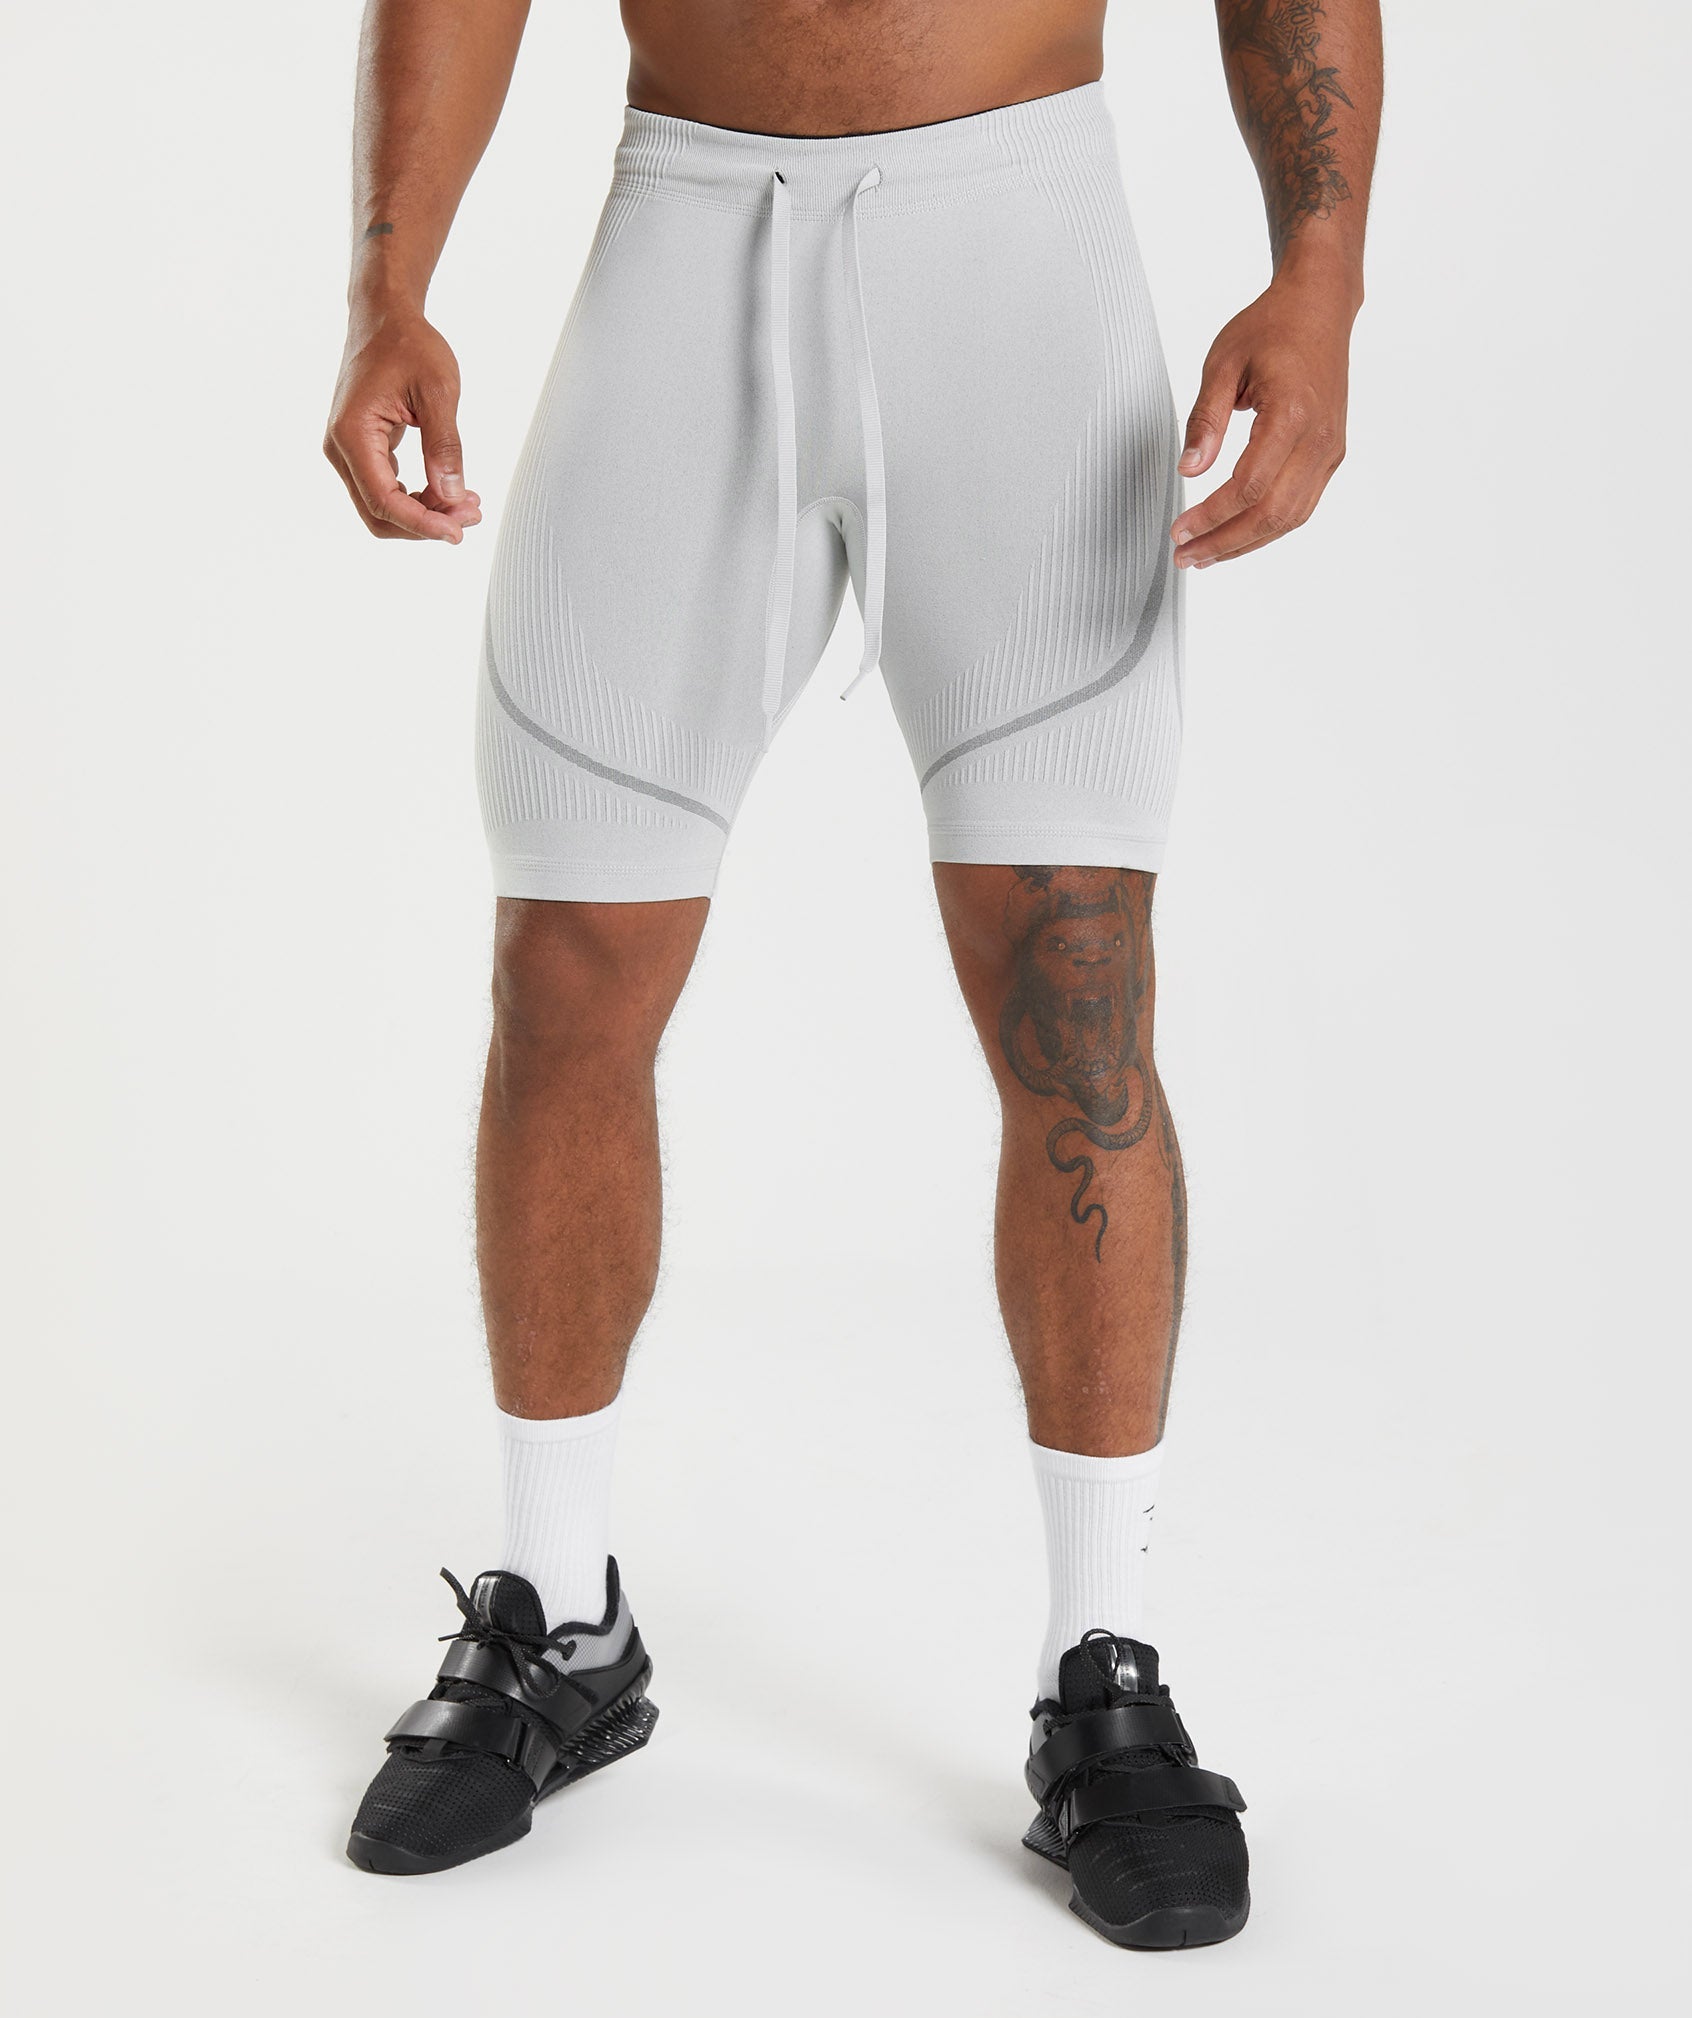 315 Seamless 1/2 Shorts in Light Grey/Charcoal Grey